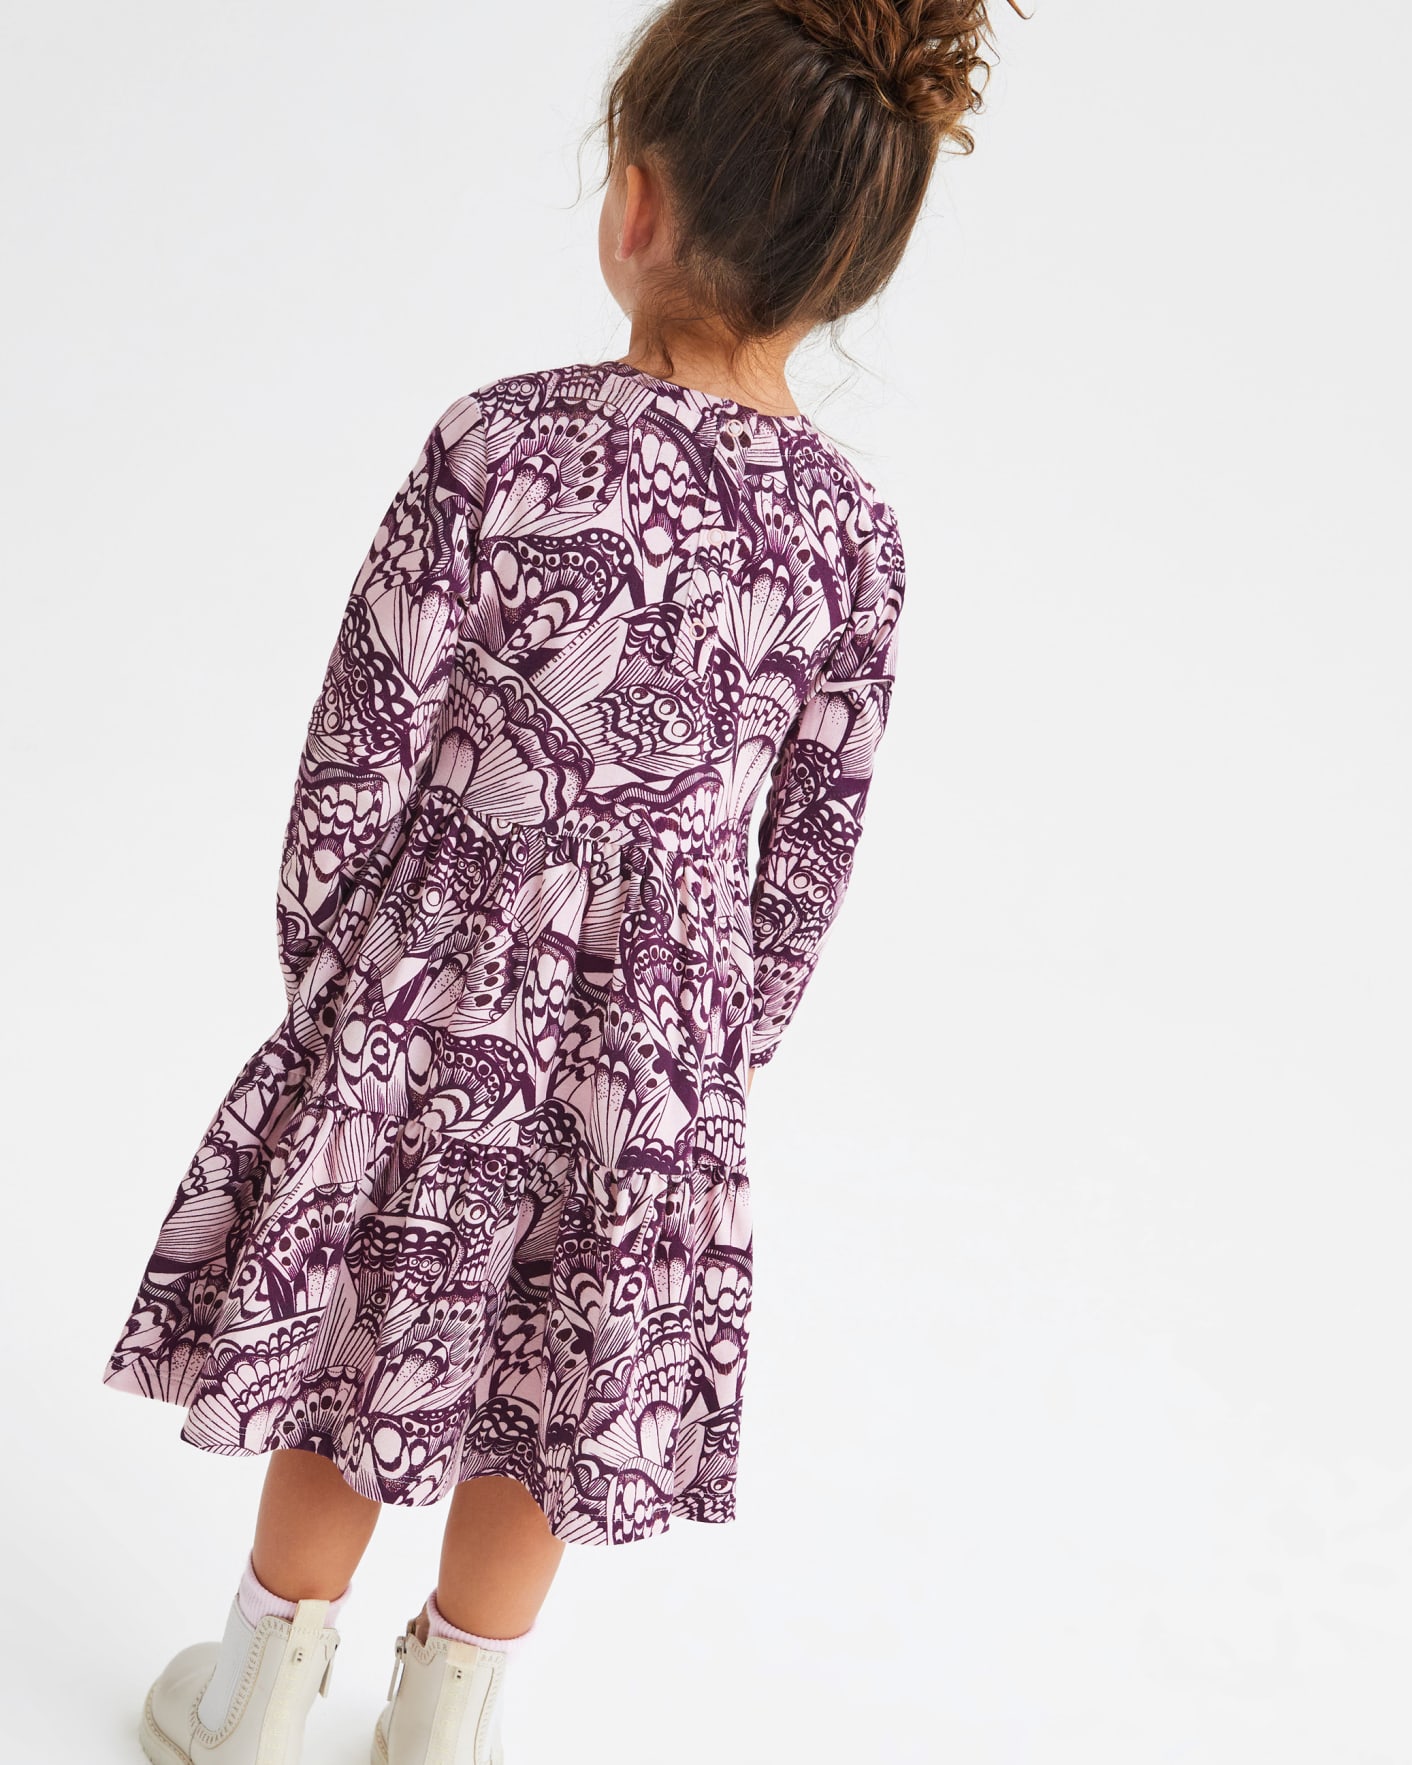 Lilac Printed Tiered Dress Ted Baker